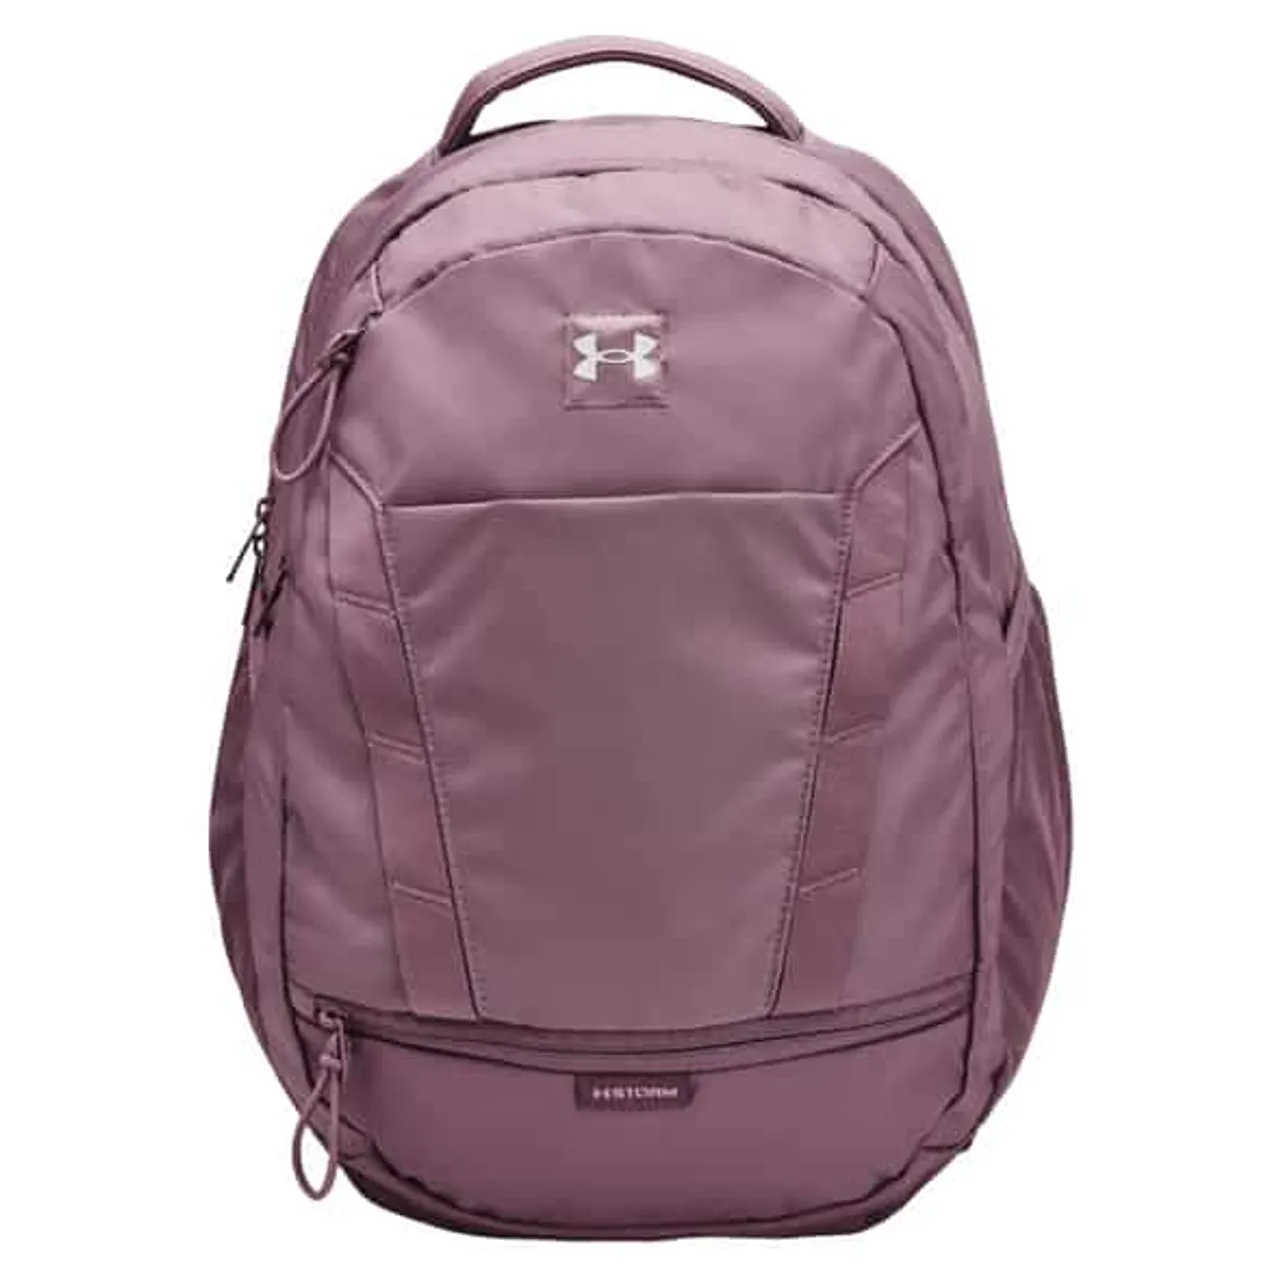 Under Armour Hustle Signature Backpack (Pflaume one size) Sporttaschen